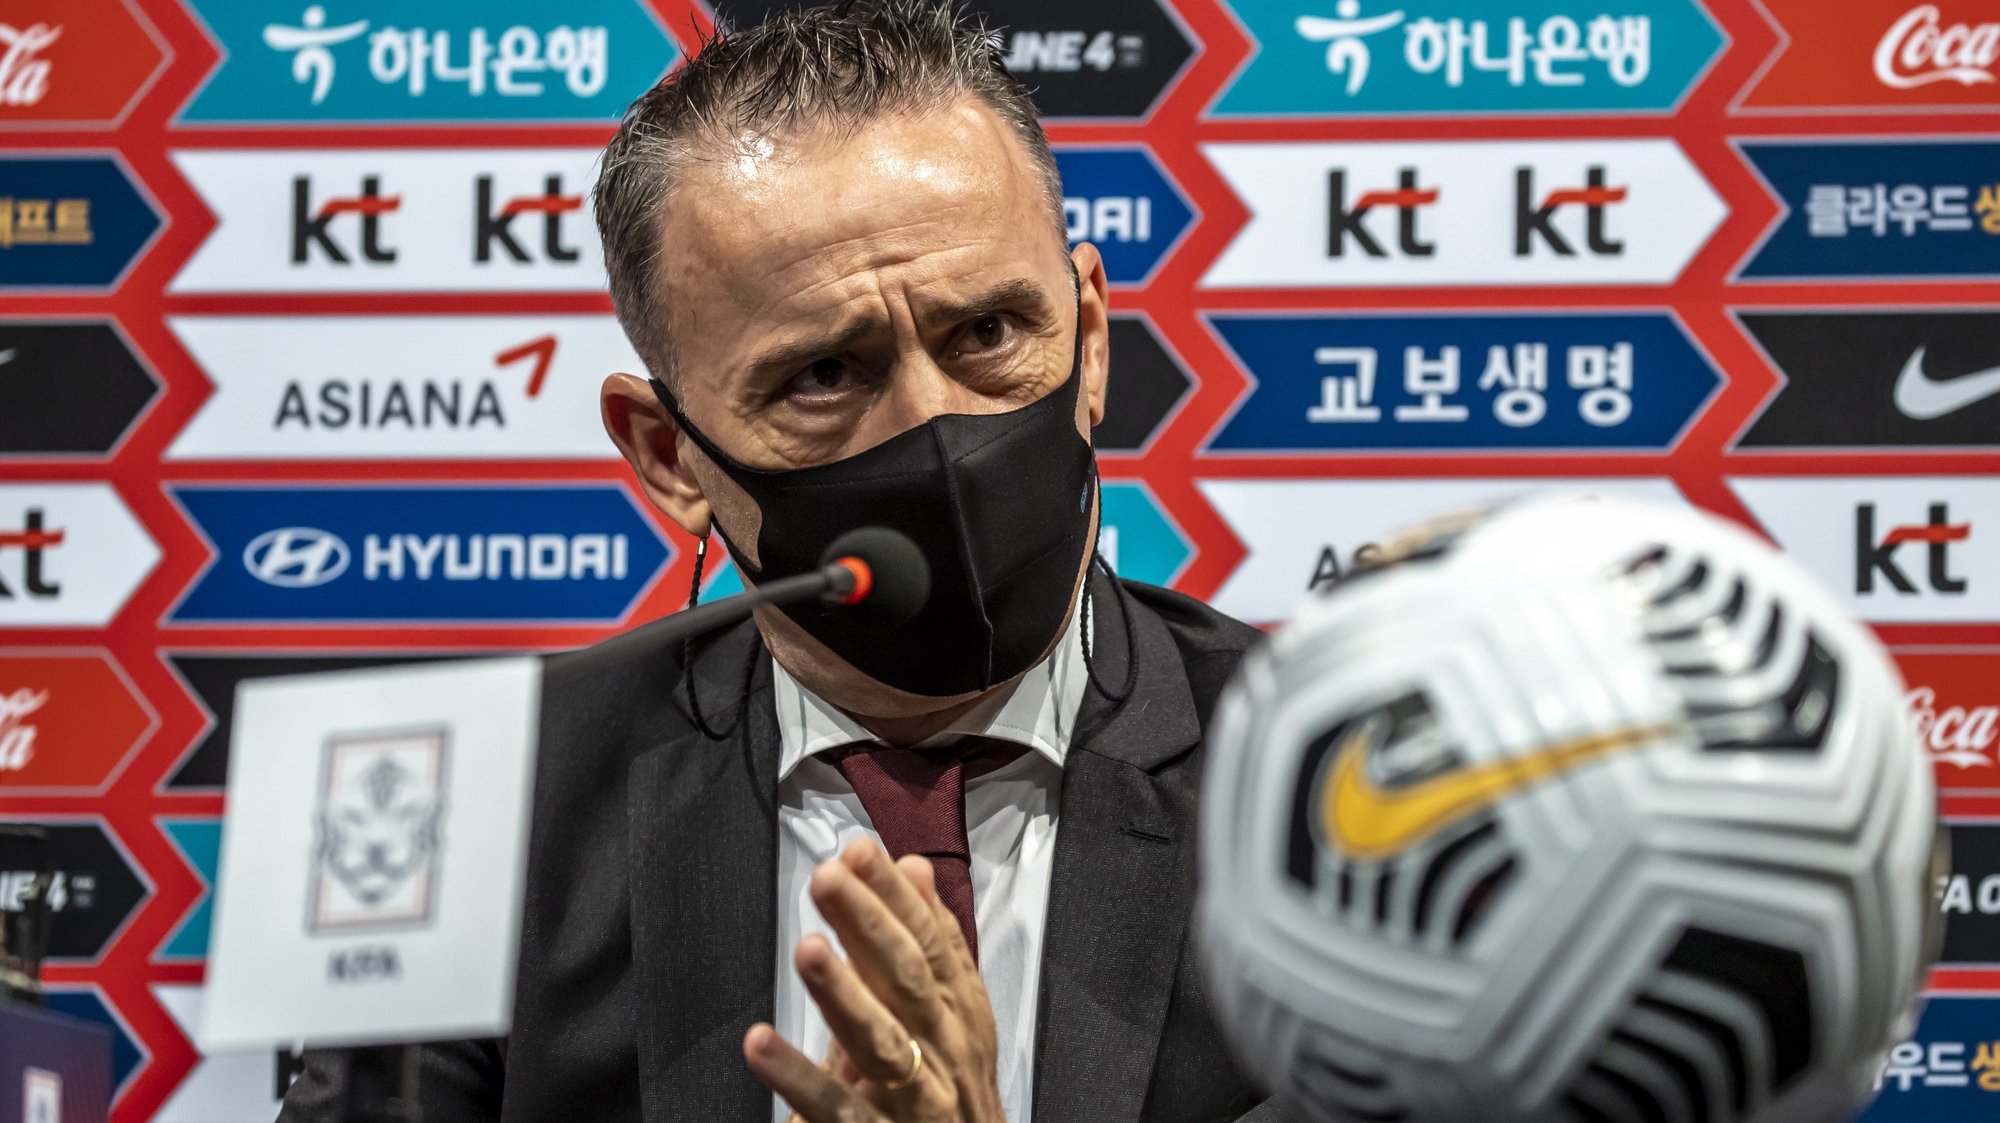 epa09323212 Head coach of the South Korean men&#039;s World Cup team Paulo Bento speaks about draws for the final round in the Asian qualifying for the 2022 World Cup during a news conference at the National Football Center in Paju, north of Seoul, South Korea, 05 July 2021. In the draws conducted July 1, South Korea, world No. 39, was included in Group A with Iran (31st), Iraq (68th), the United Arab Emirates (73rd), Syria (79th) and Lebanon (93rd).  EPA/YONHAP SOUTH KOREA OUT